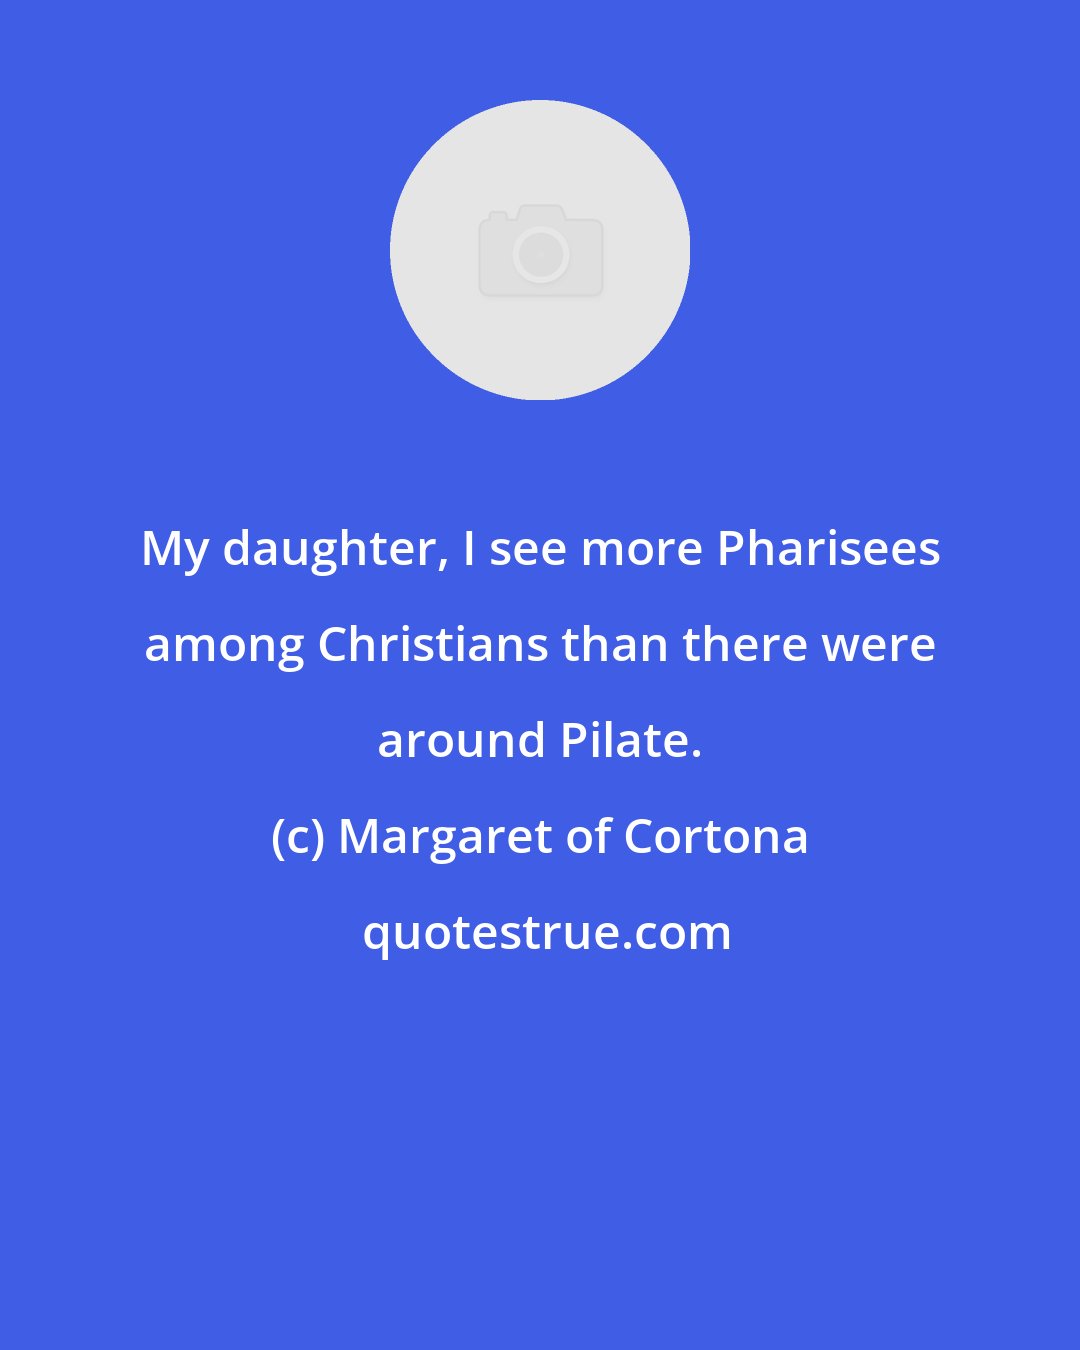 Margaret of Cortona: My daughter, I see more Pharisees among Christians than there were around Pilate.